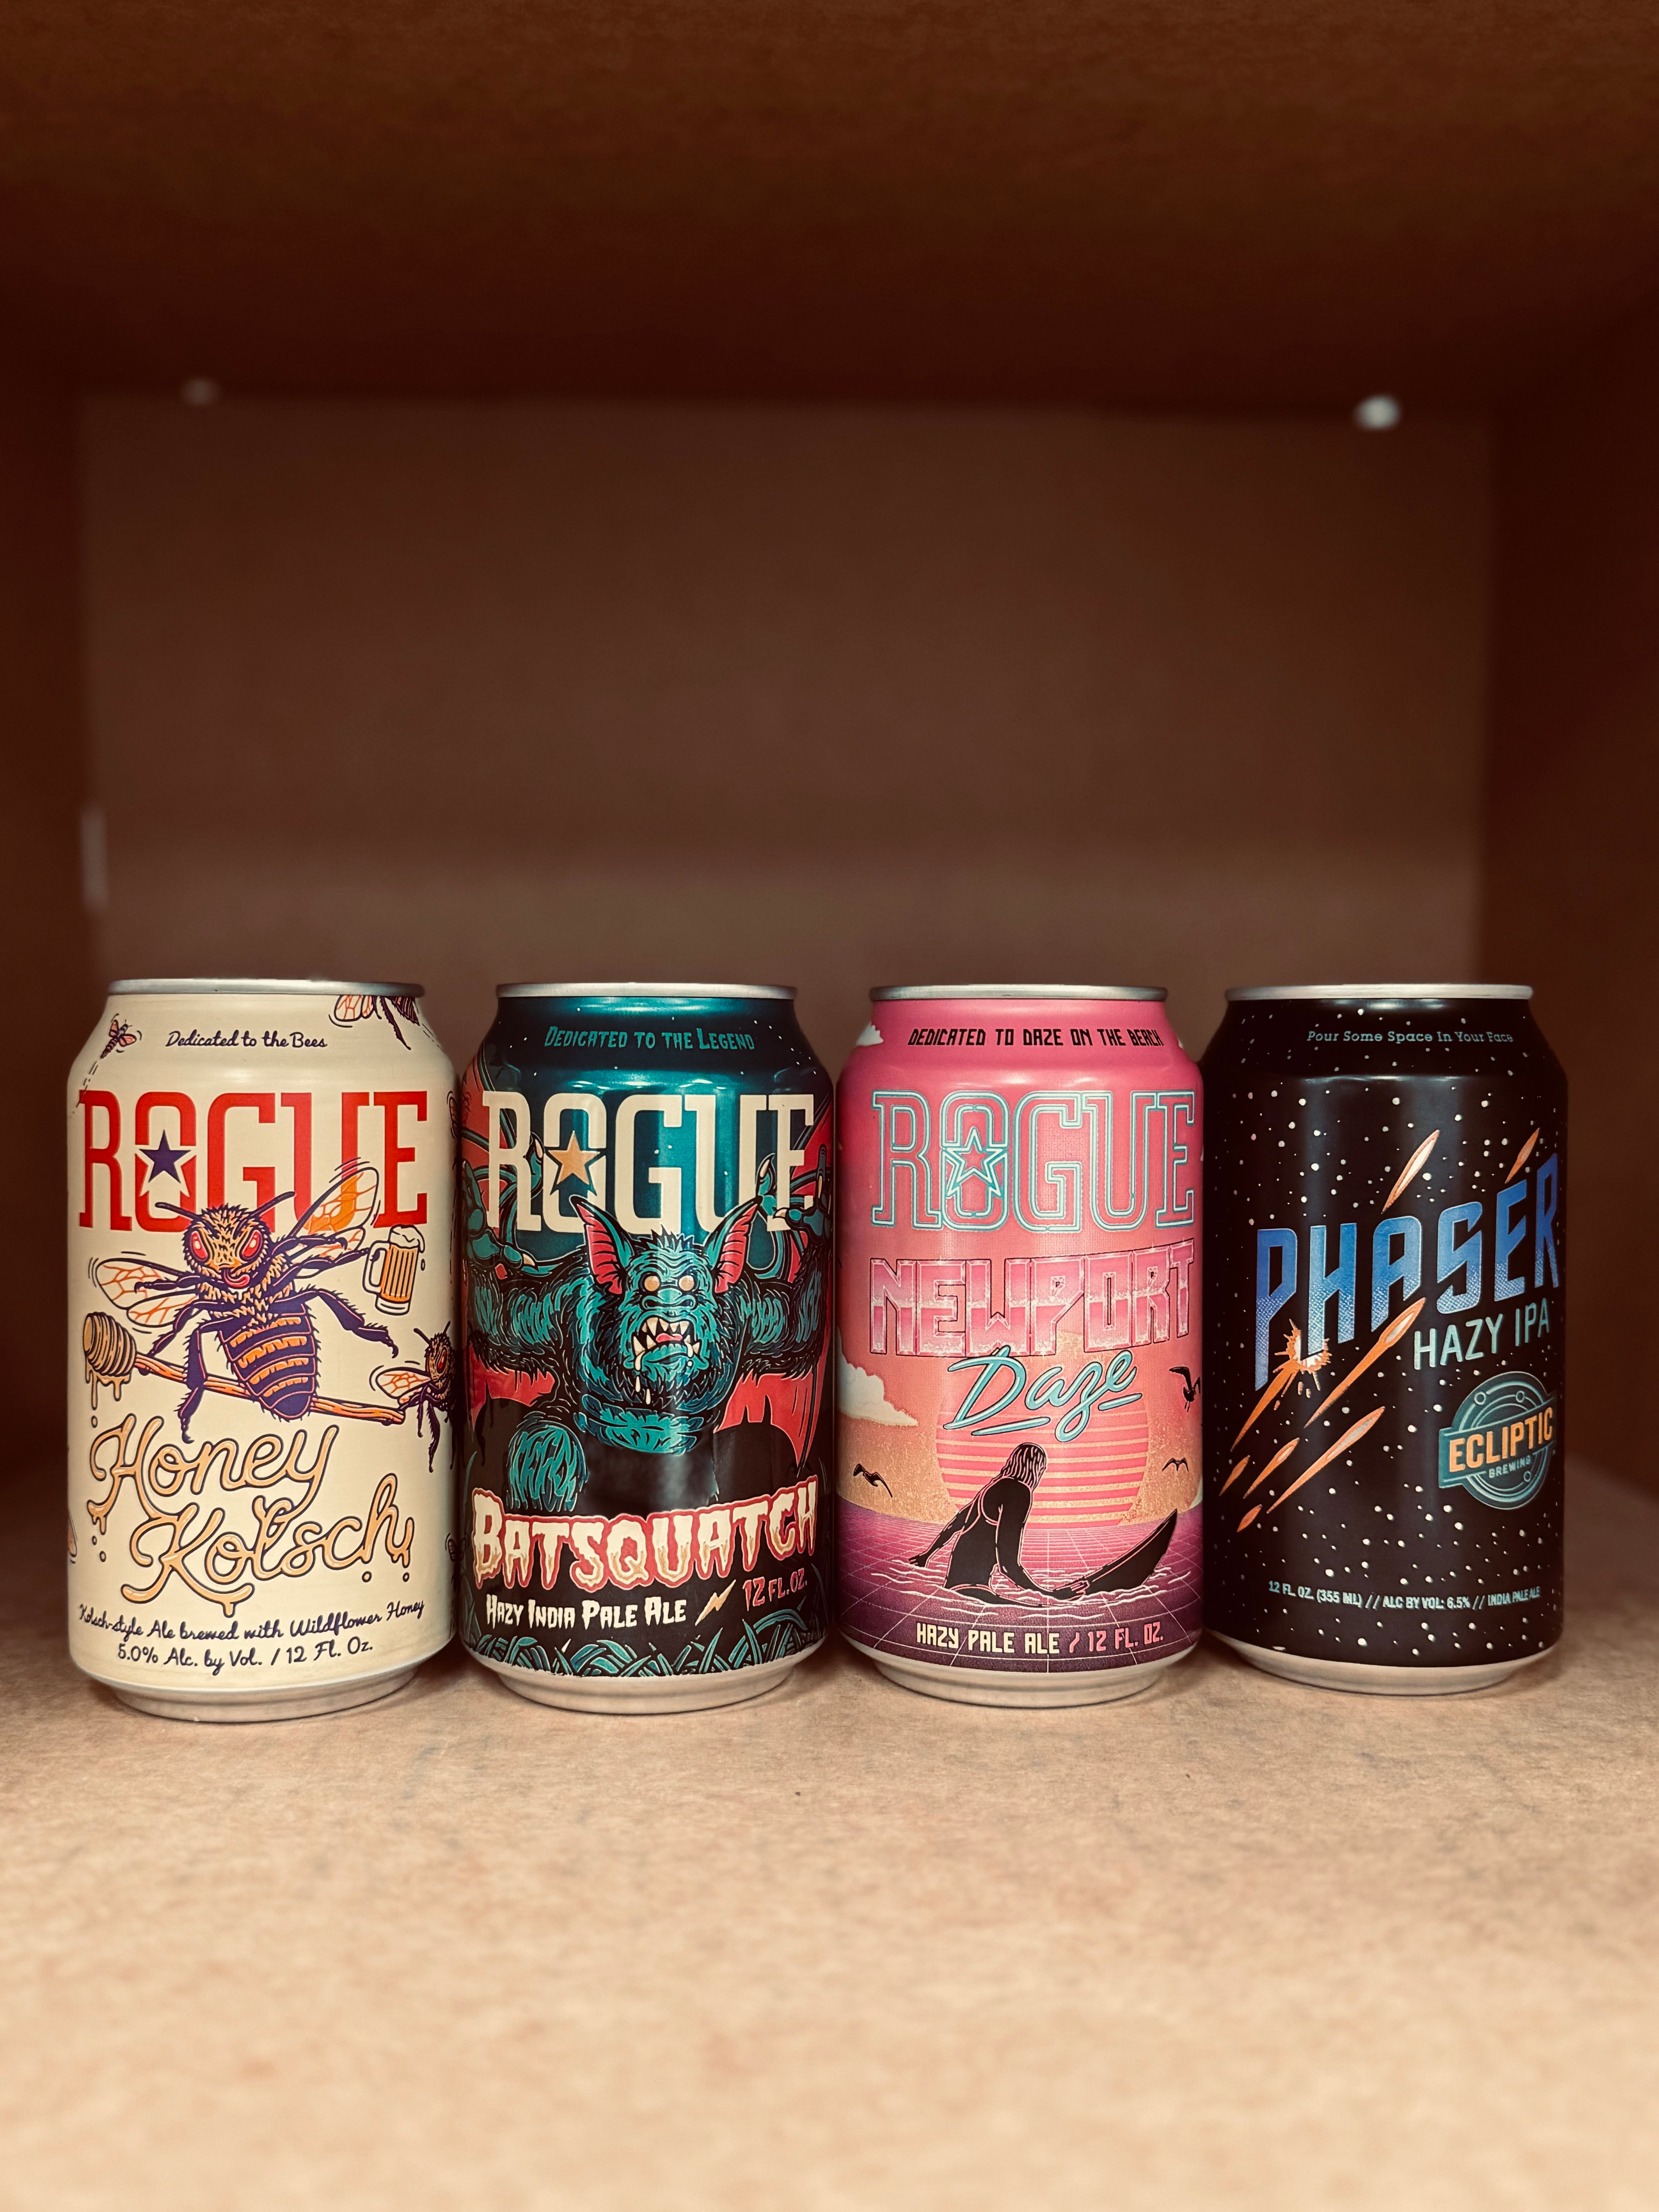 -Rogue- Rogue 🚀 Take Off Set 2-Packs & Cases- Only @ Beer Republic - The best online beer store for American & Canadian craft beer - Buy beer online from the USA and Canada - Bier online kopen - Amerikaans bier kopen - Craft beer store - Craft beer kopen - Amerikanisch bier kaufen - Bier online kaufen - Acheter biere online - IPA - Stout - Porter - New England IPA - Hazy IPA - Imperial Stout - Barrel Aged - Barrel Aged Imperial Stout - Brown - Dark beer - Blond - Blonde - Pilsner - Lager - Wheat - Weizen - 